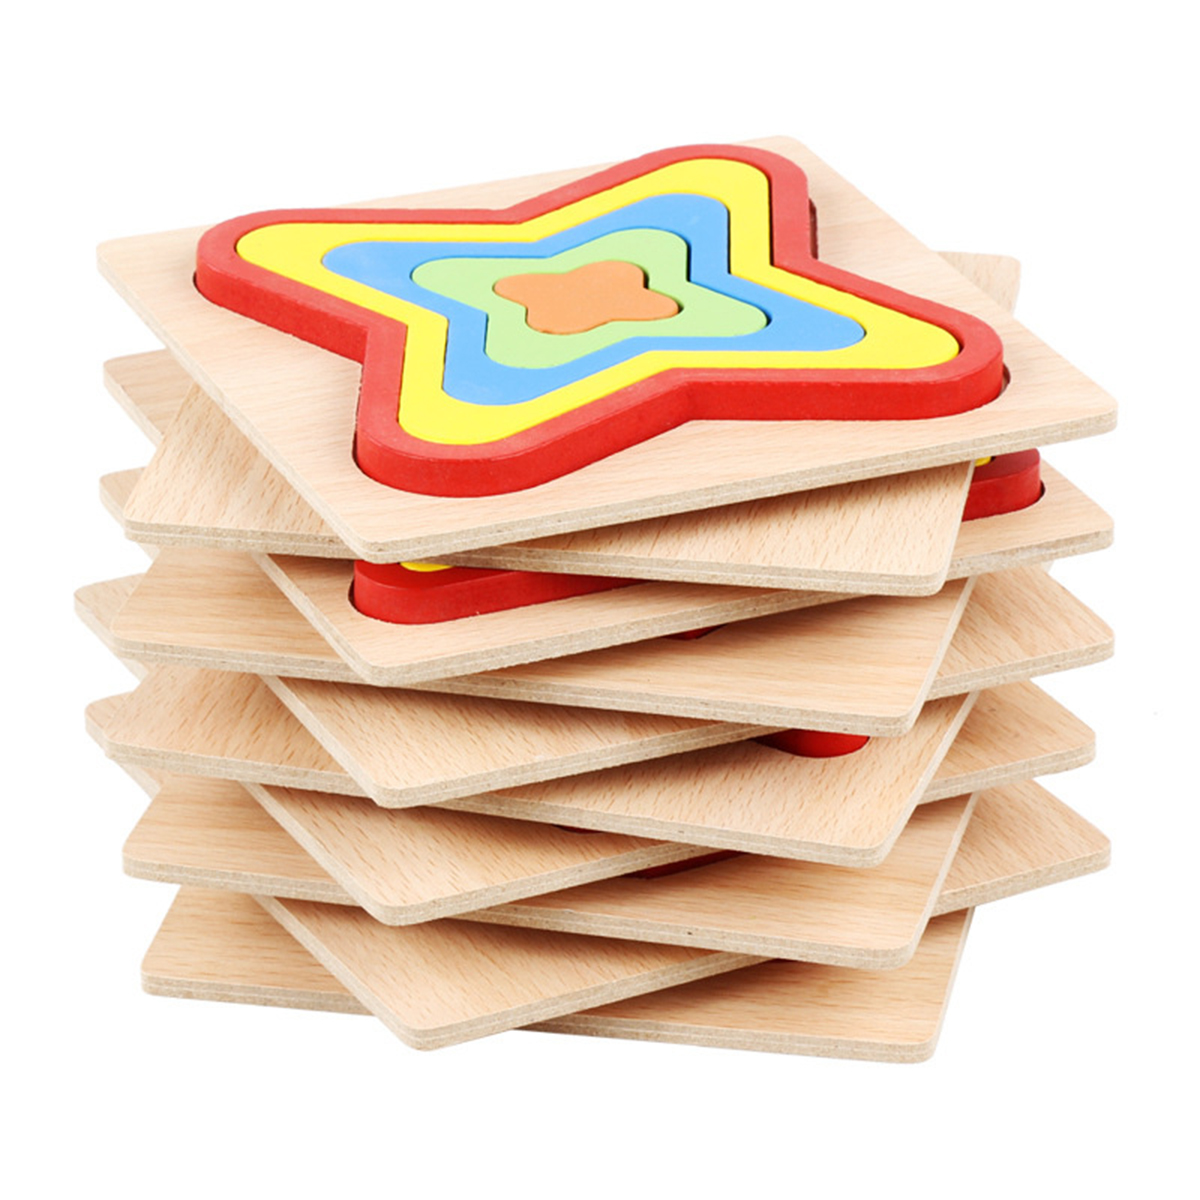 Shape Cognition Board Geometry Jigsaw Puzzle Wooden Kids Educational Learning Toys 12